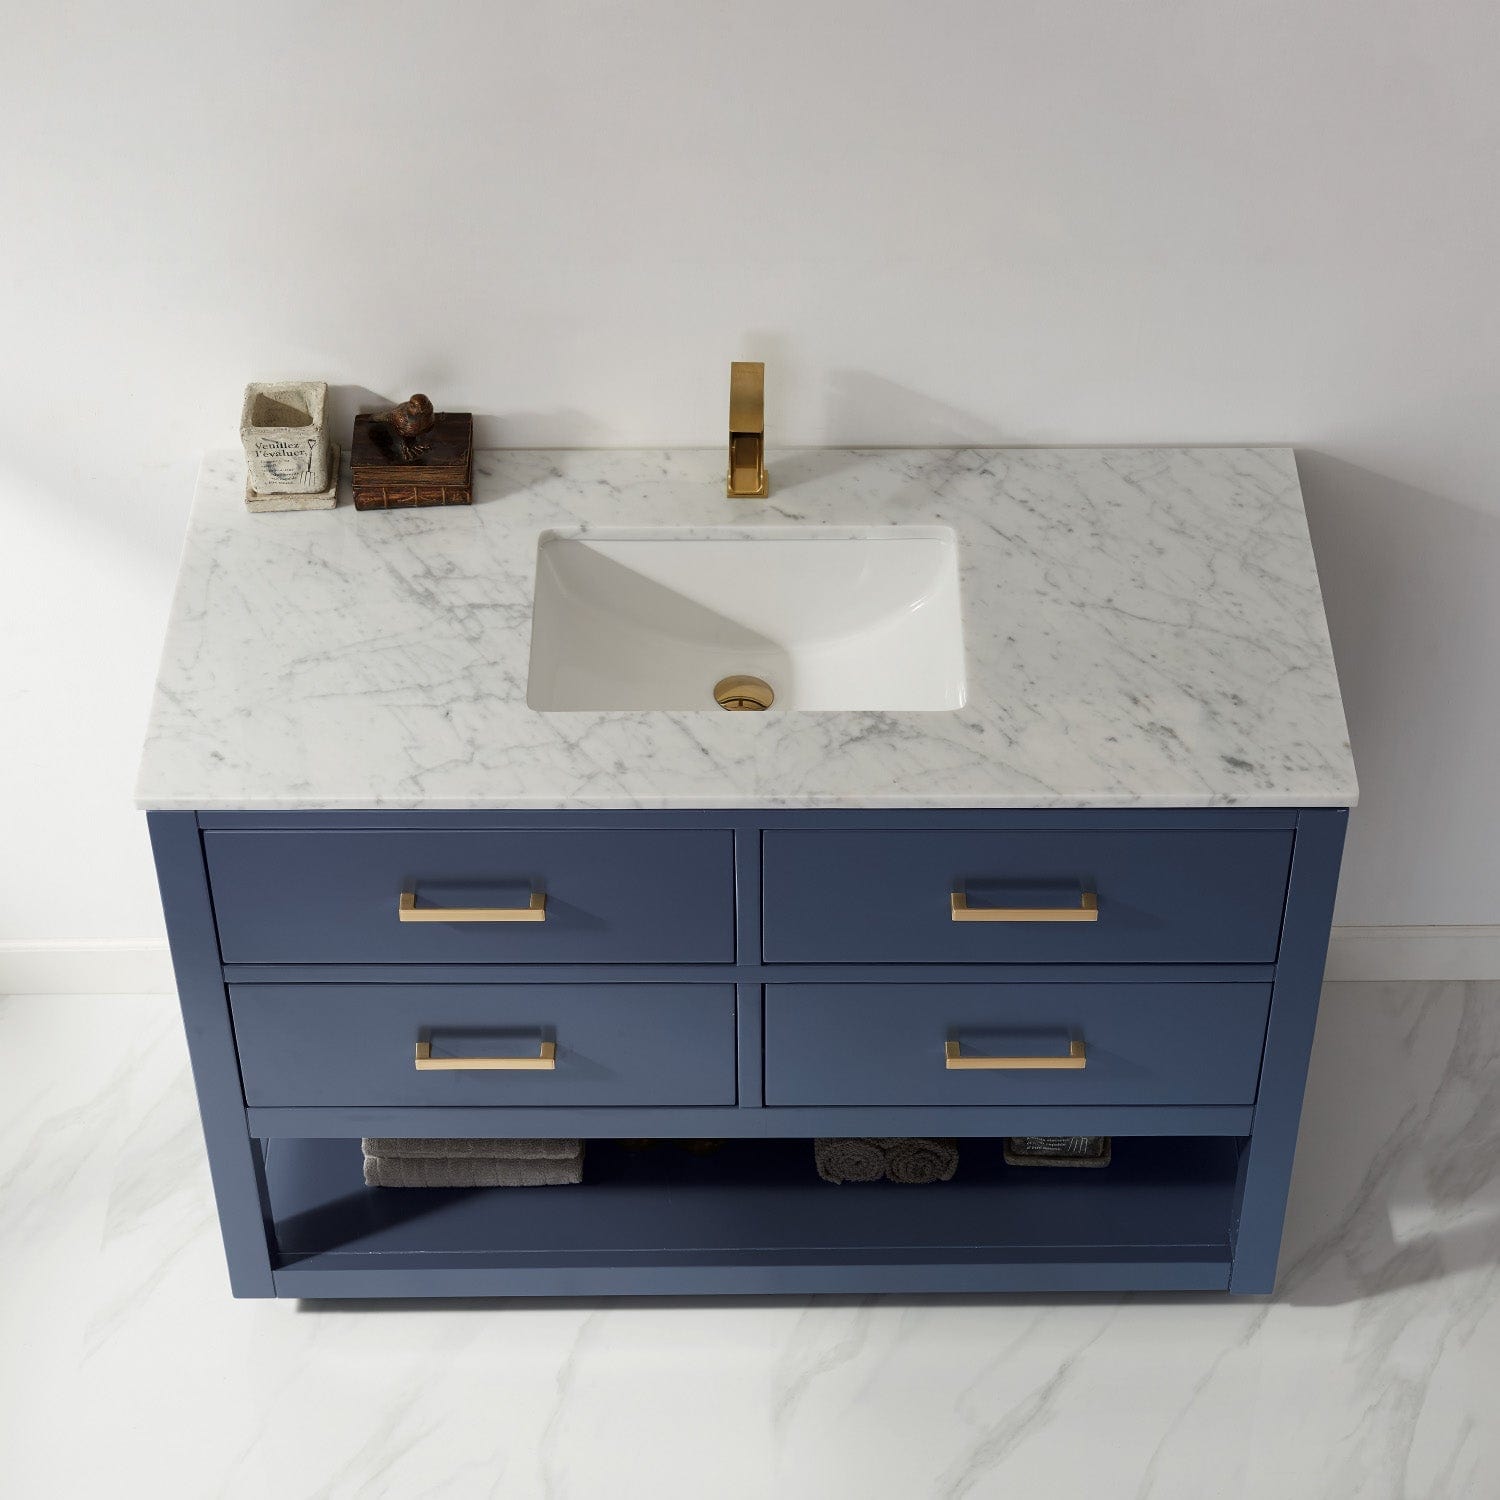 Altair Remi 48" Single Bathroom Vanity Set in Royal Blue and Carrara White Marble Countertop without Mirror 532048-RB-CA-NM - Molaix631112971485Vanity532048-RB-CA-NM